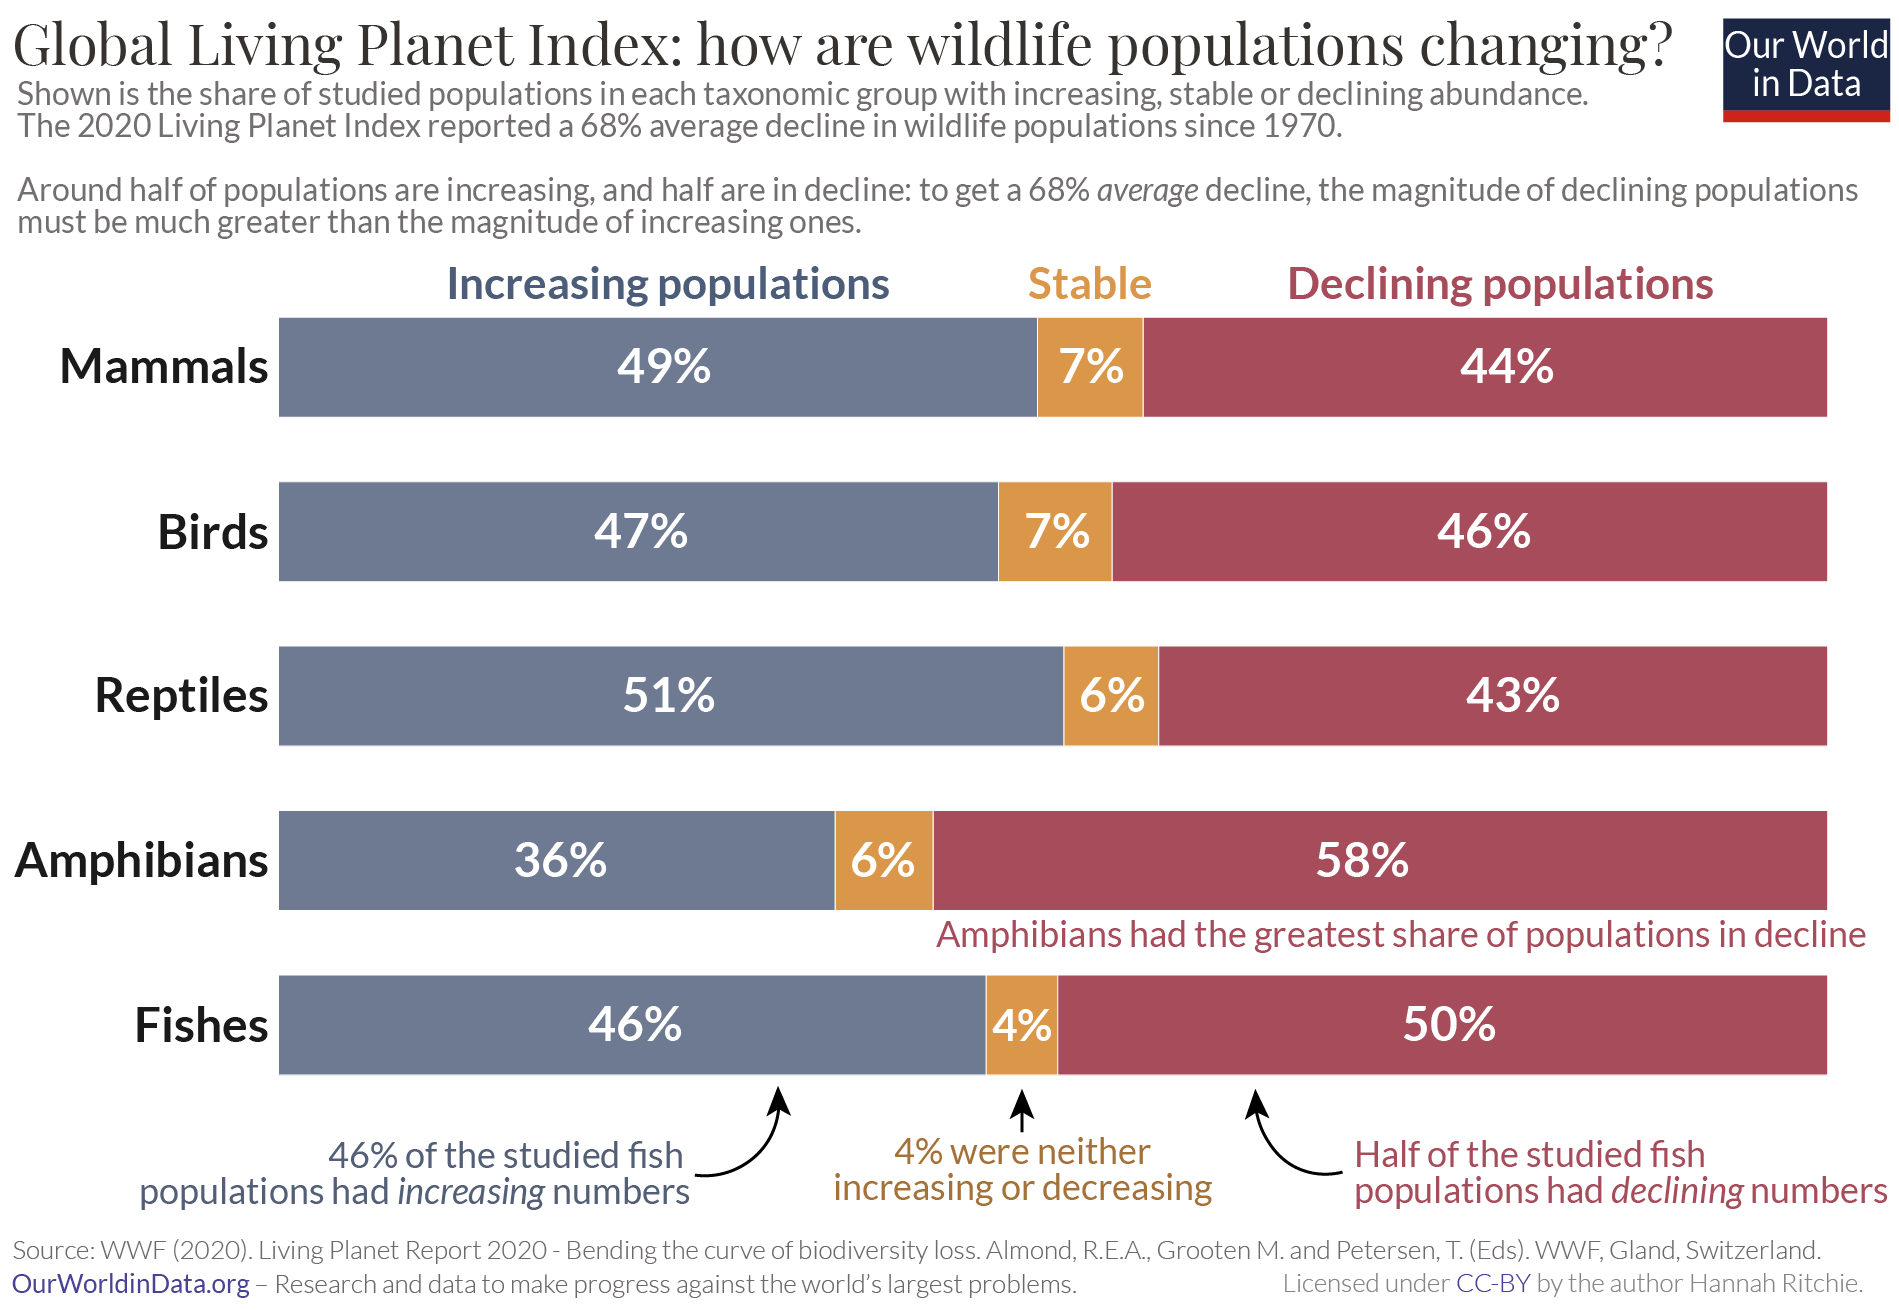 Share of populations increasing and declining living planet index